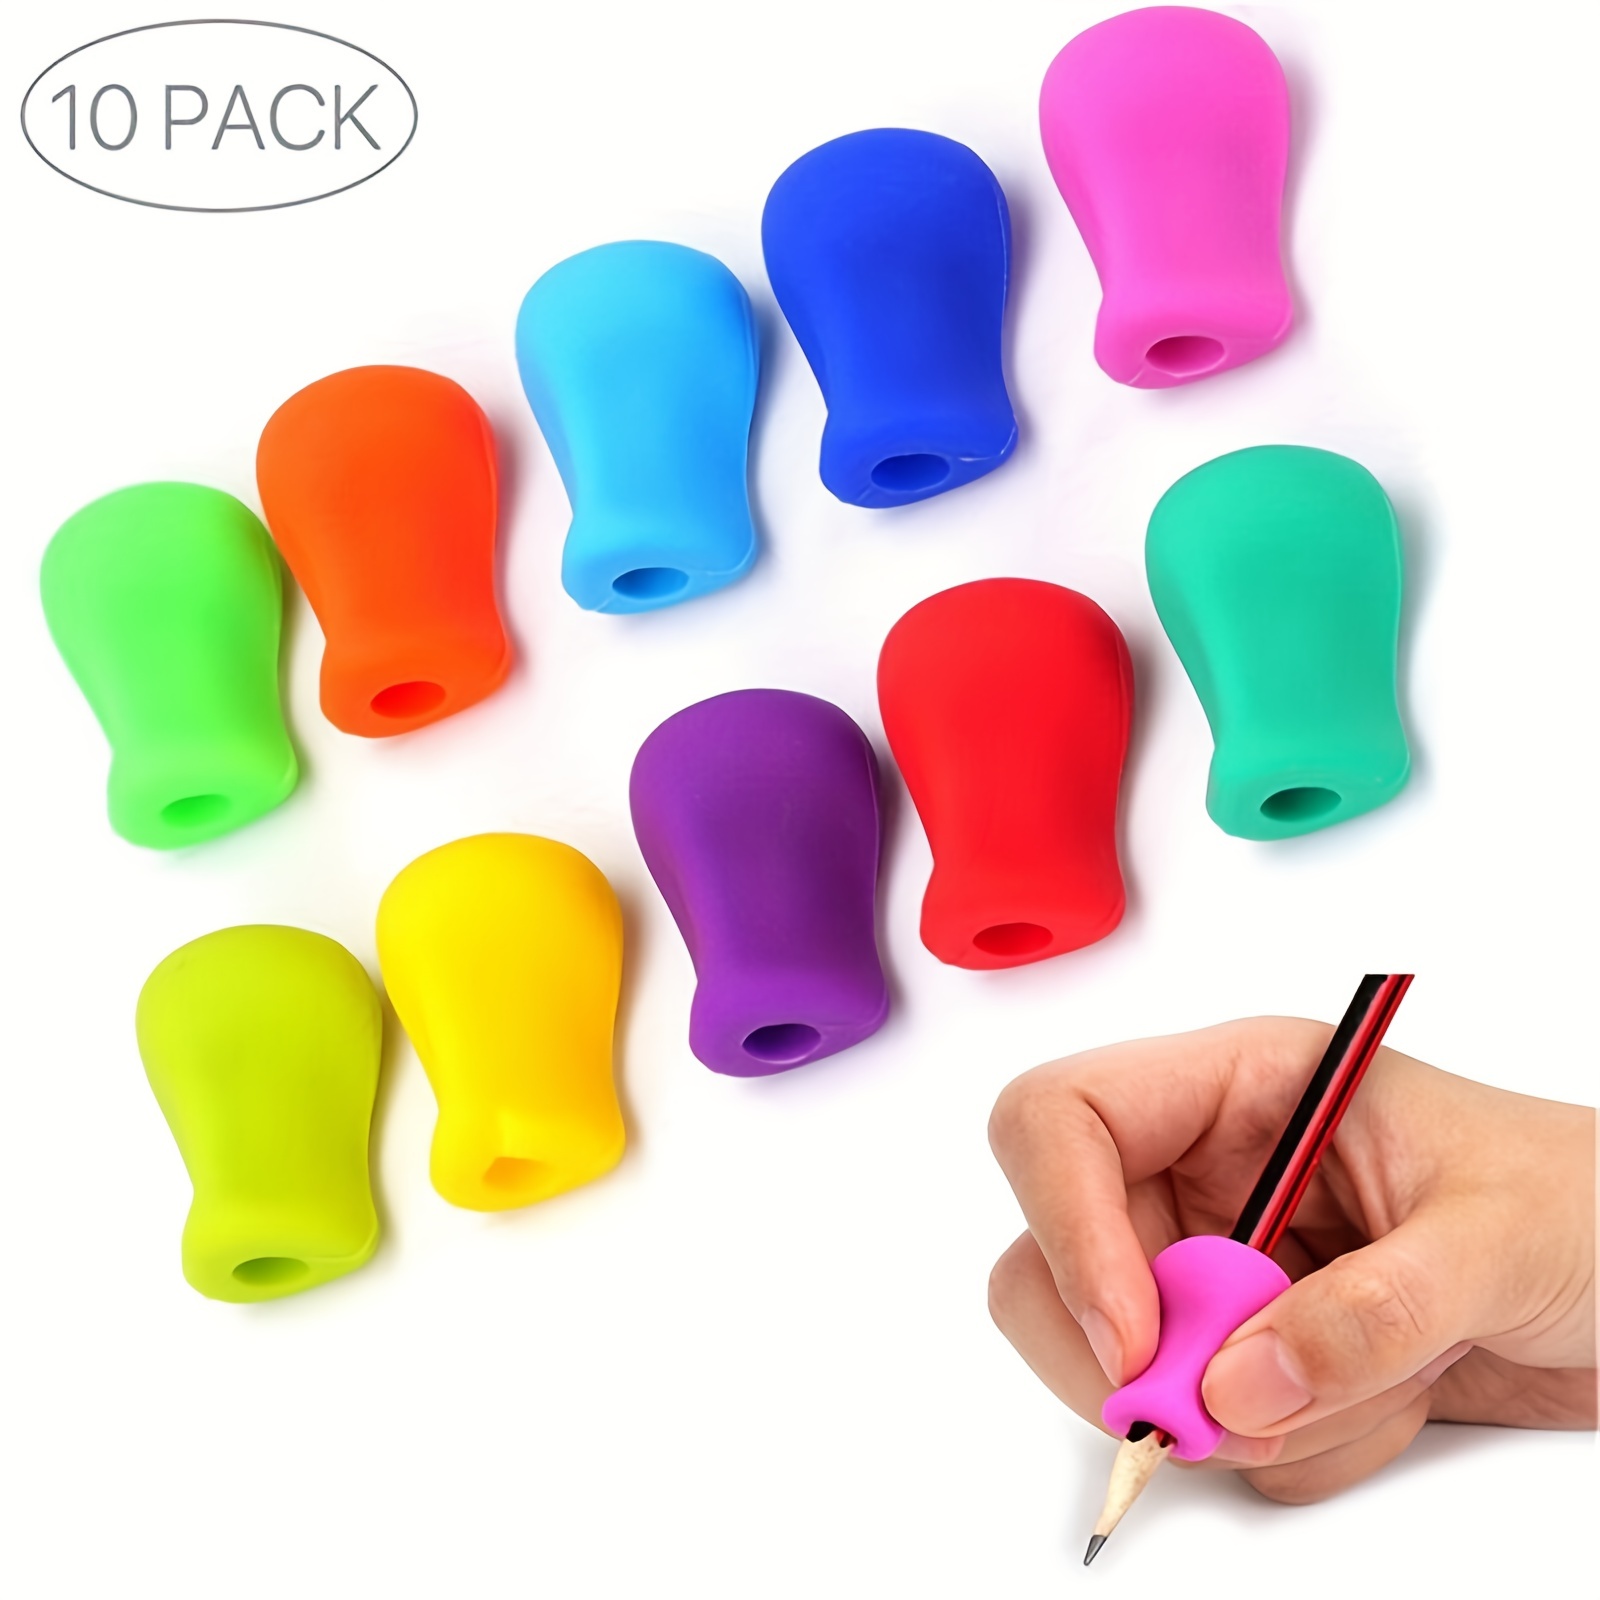 The Pencil Grip Non-Toxic Pliable Pencil Grip Pack - Assorted Color- Pack 5